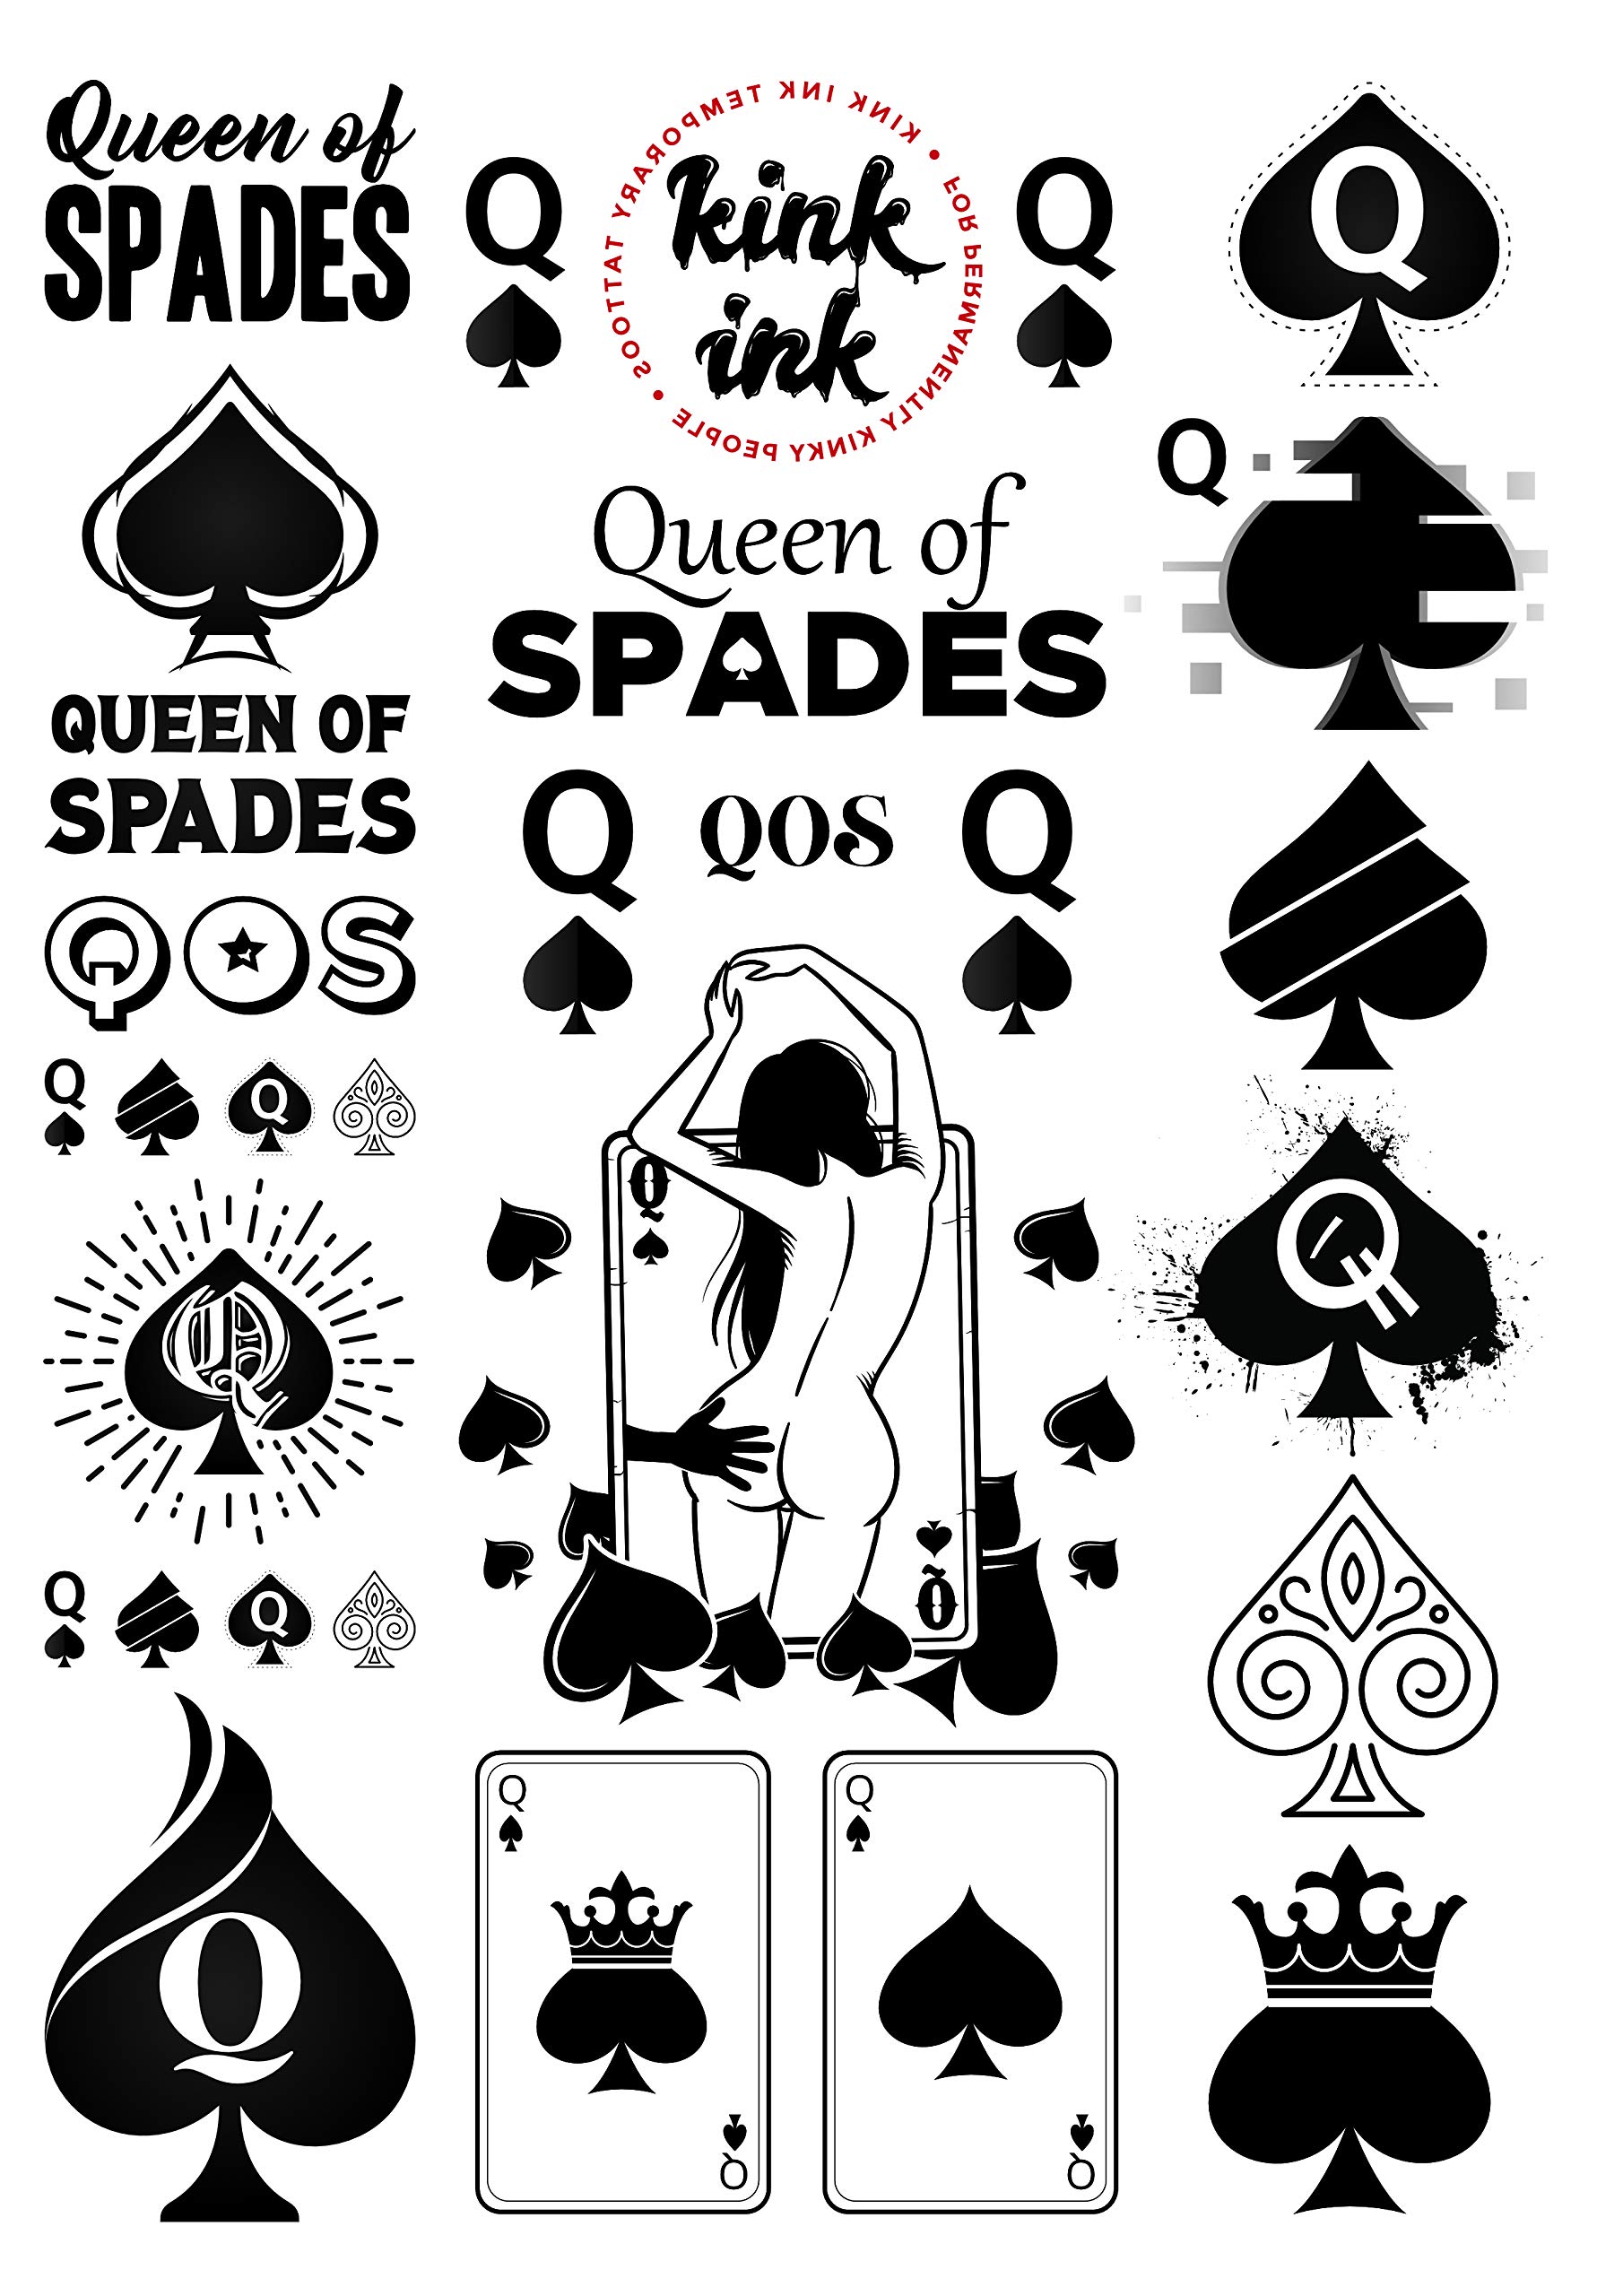 donna jeffs recommends Queen Of Spades Tatoo